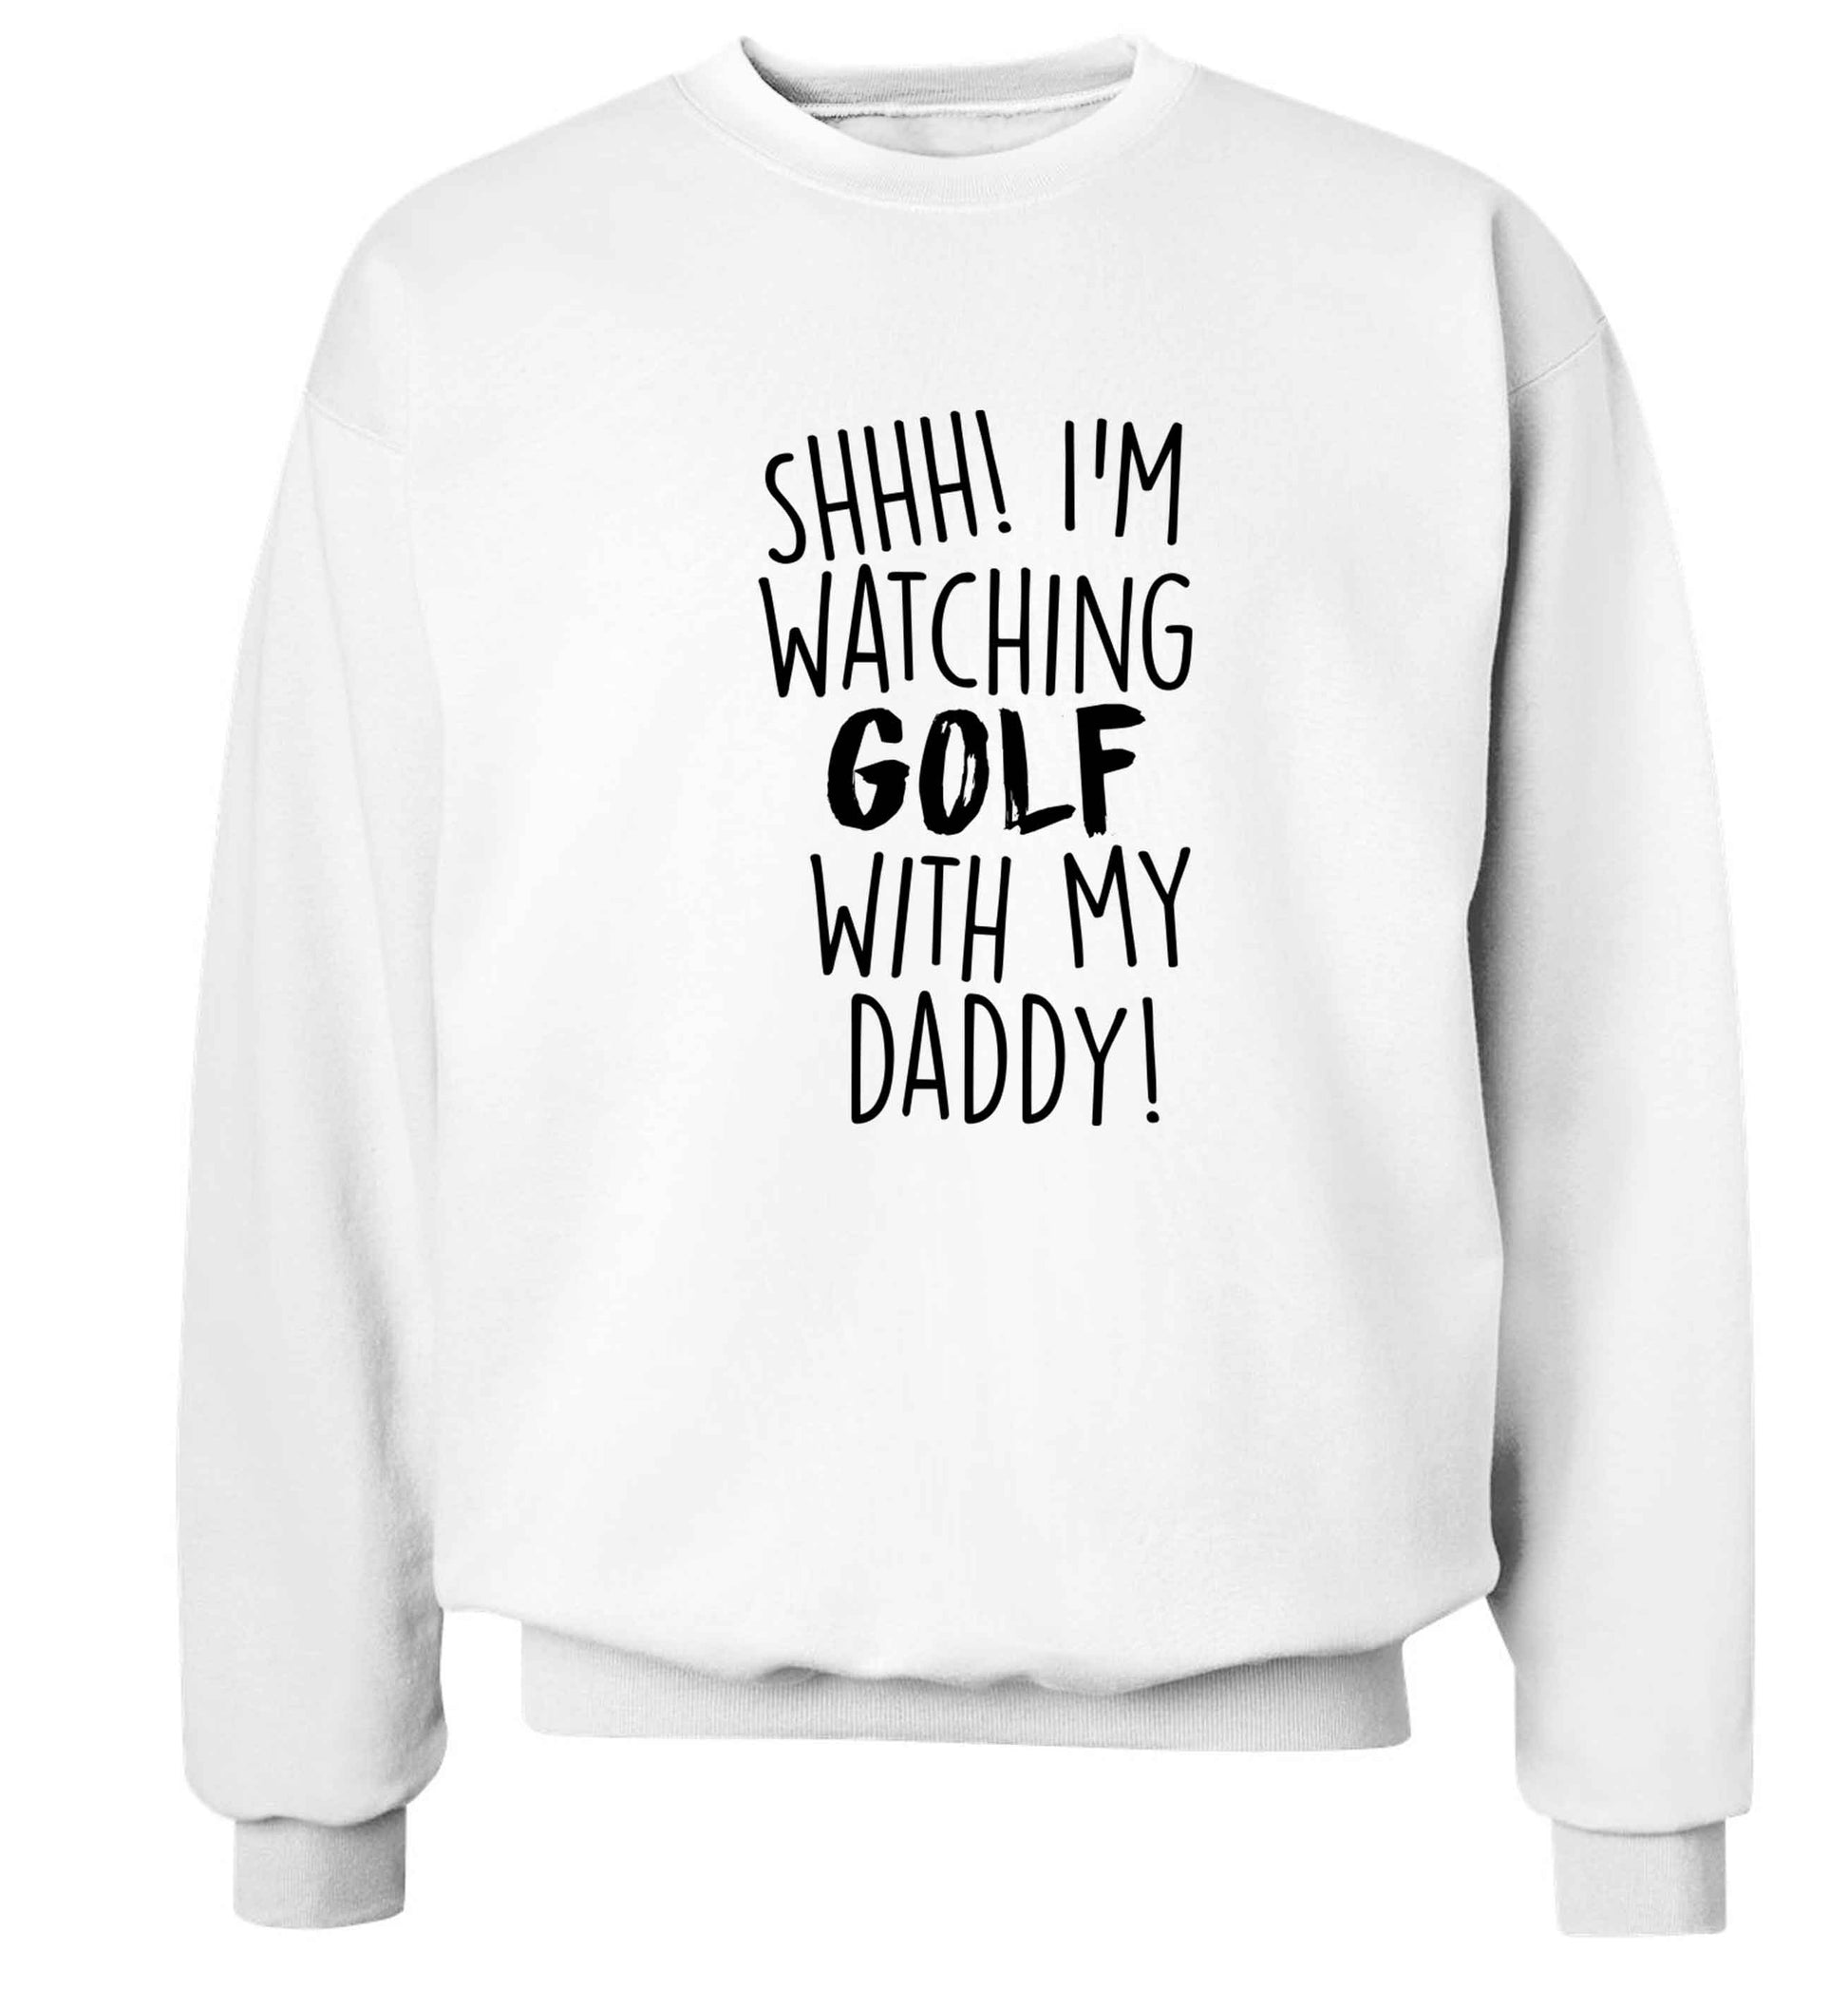 Shh I'm watching golf with my daddy Adult's unisex white Sweater 2XL